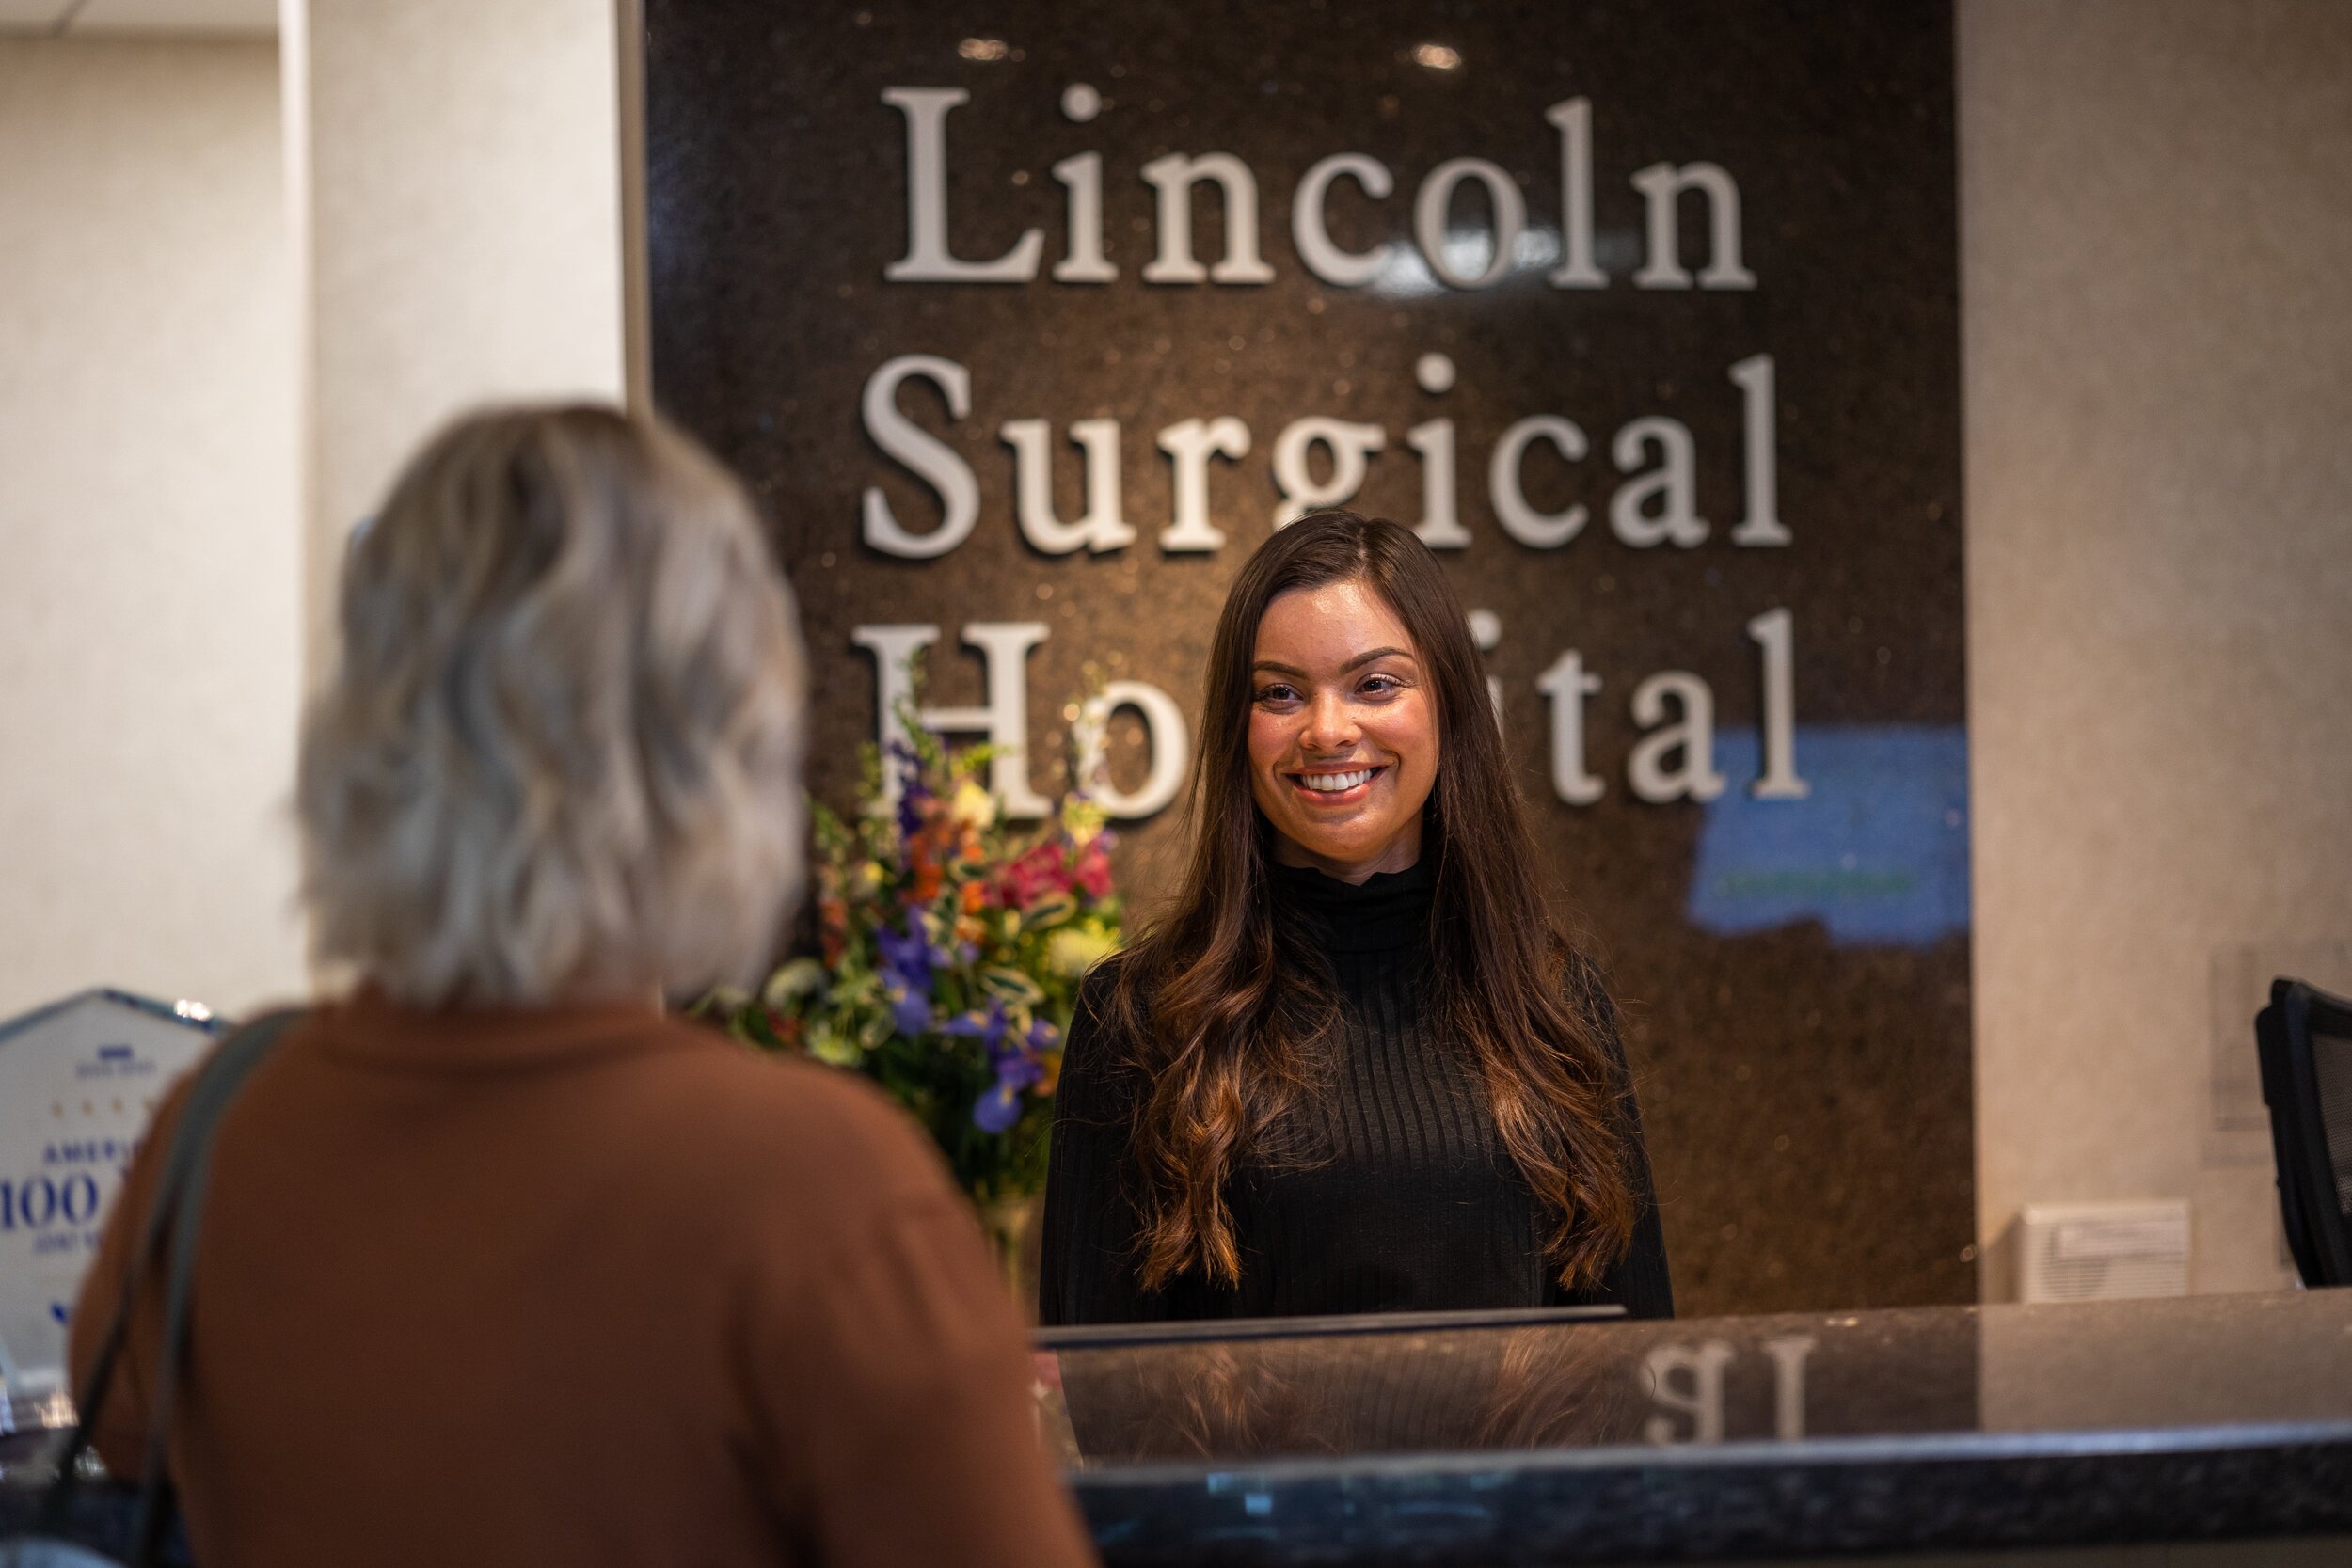 Lincoln, NE Commercial Photographer - Lincoln Surgical Hospital